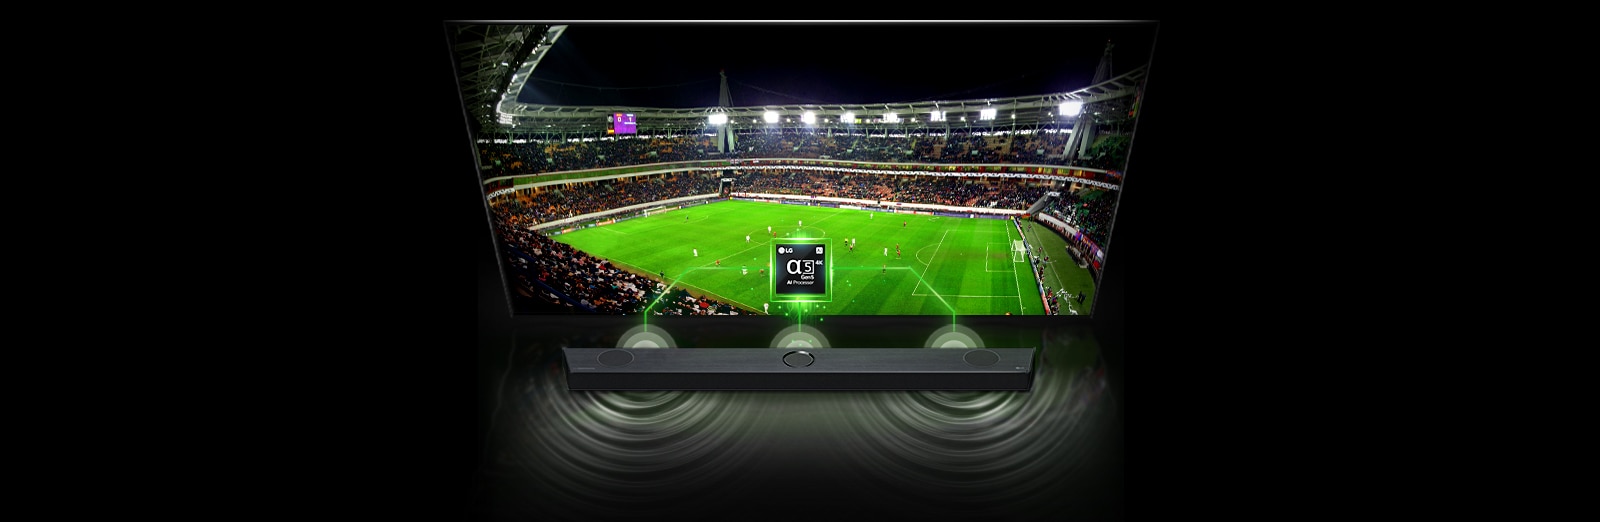 There is an image of 'Alpha 5 Chip' on the TV and a sound bar just below it. And on TV, the screen of the soccer stadium, the woman walking on the sunset beach, and the concert hall are shown one after another, and on the sound bar, the sound wave effect and color change according to the screen.